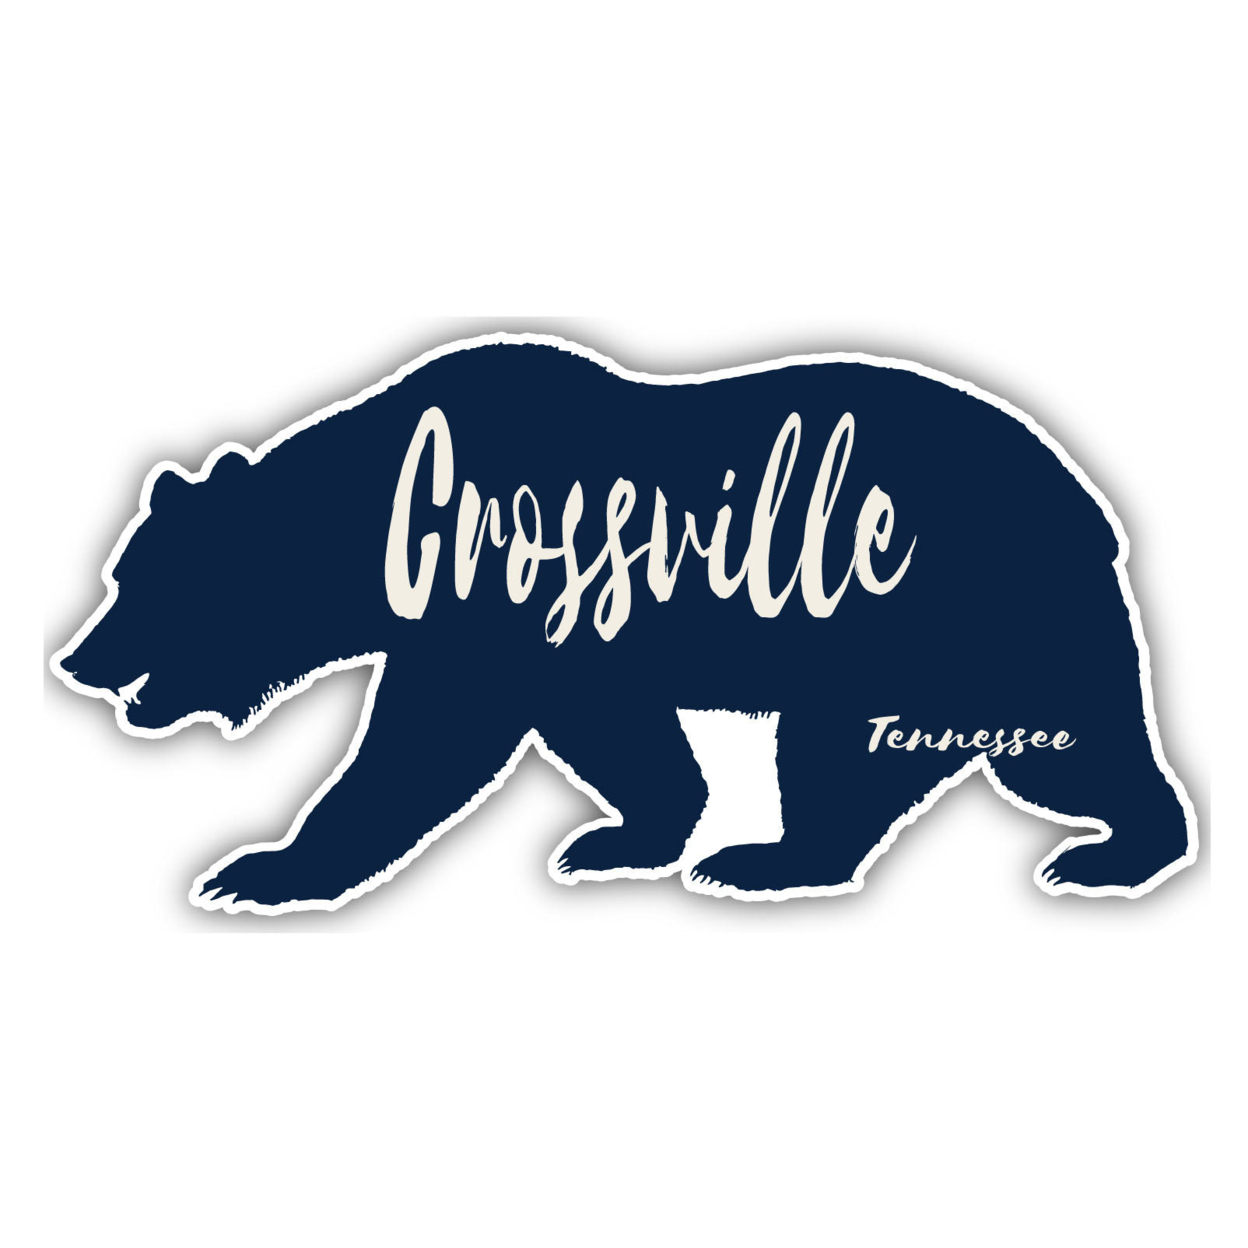 Crossville Tennessee Souvenir Decorative Stickers (Choose Theme And Size) - Single Unit, 8-Inch, Adventures Awaits